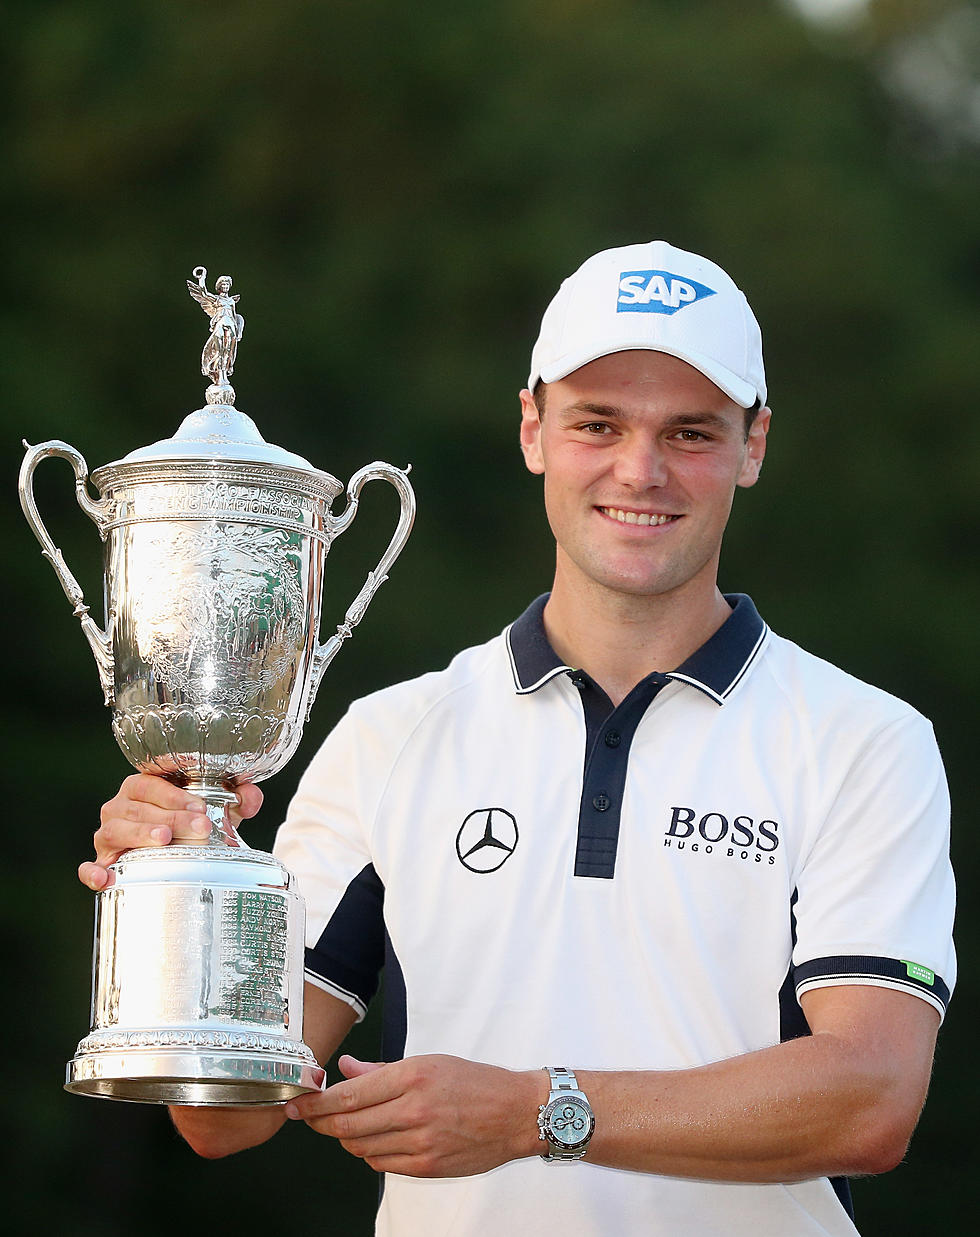 Martin Kaymer Shows Why He Is One Of The Best In The World